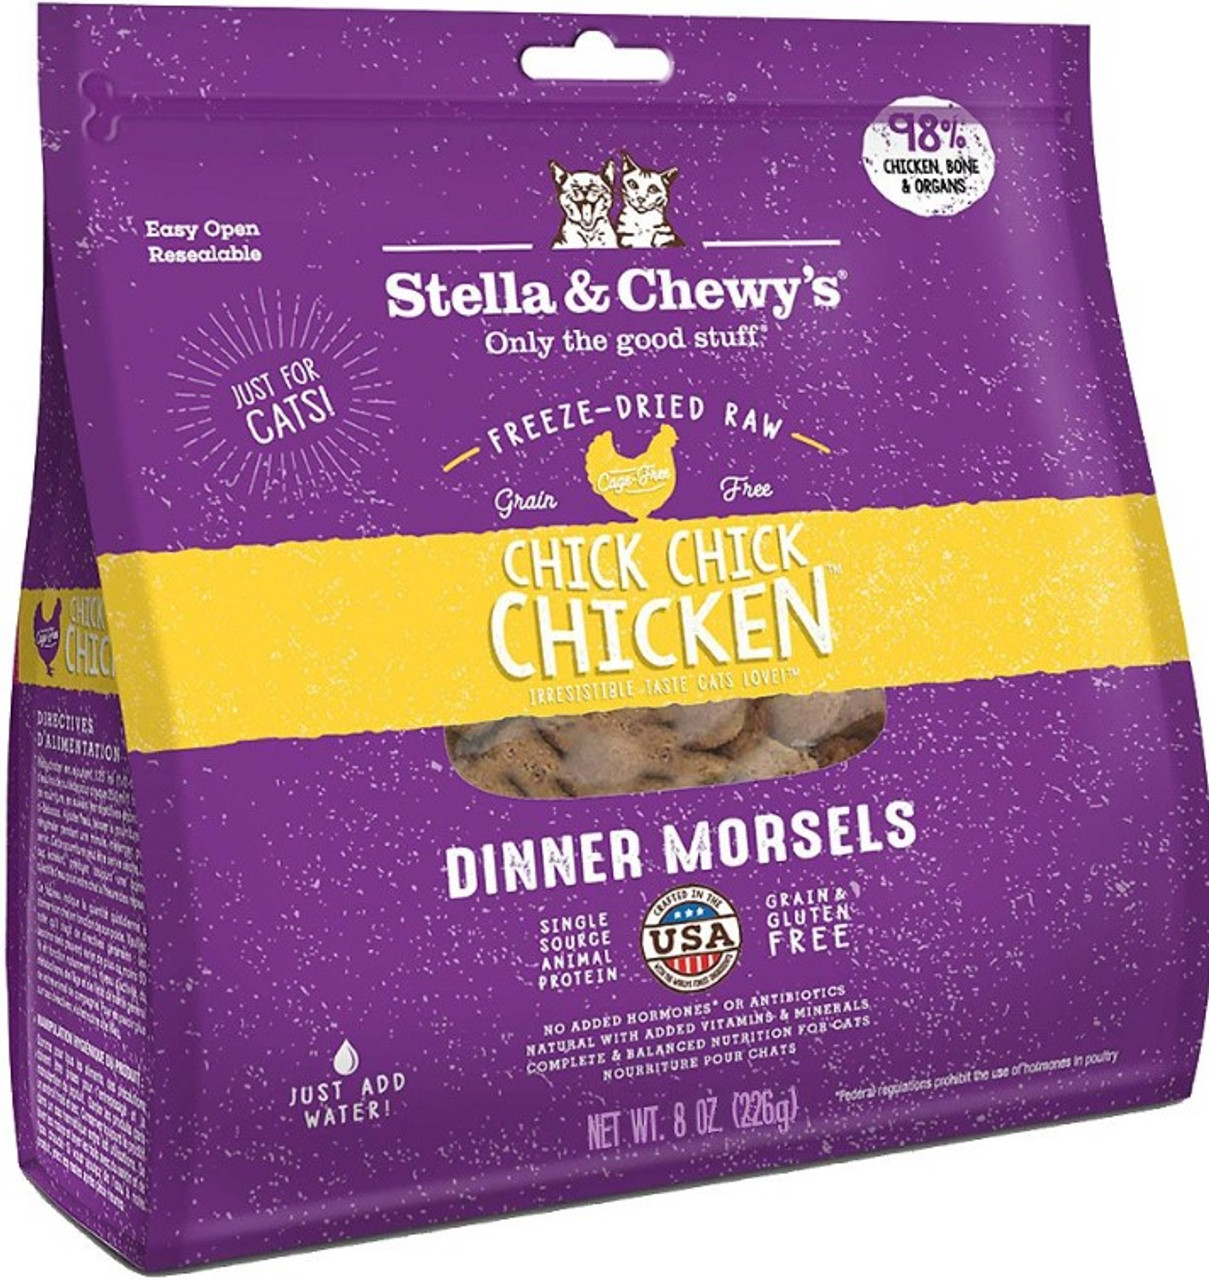 STELLA & CHEWY'S Marie's Magical Dinner Dust Freeze-Dried Raw Cage-Free  Chicken Dog Food Topper, 7-oz bag 